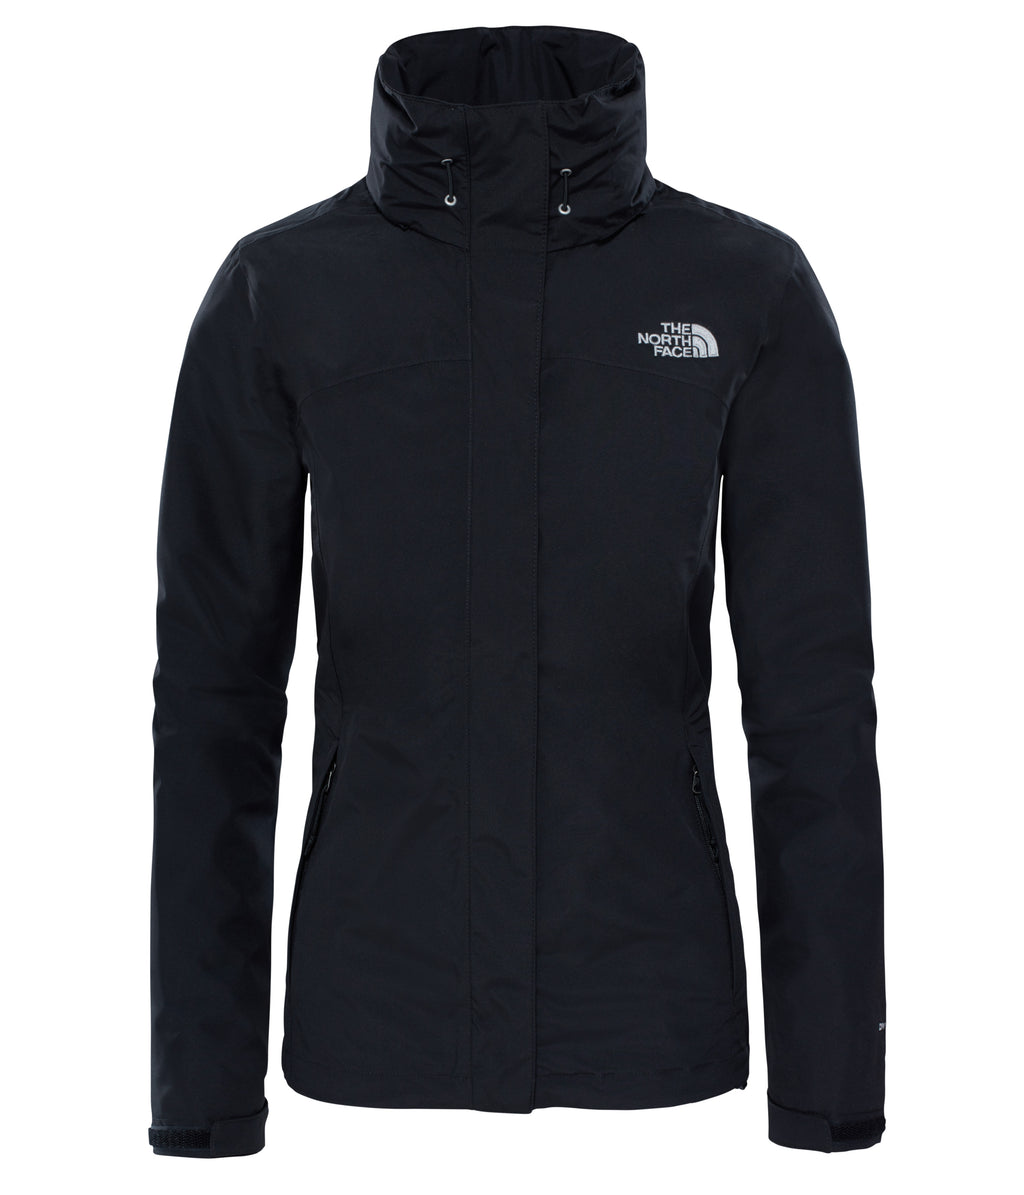 The North Face Women's Sangro promotional Jacket